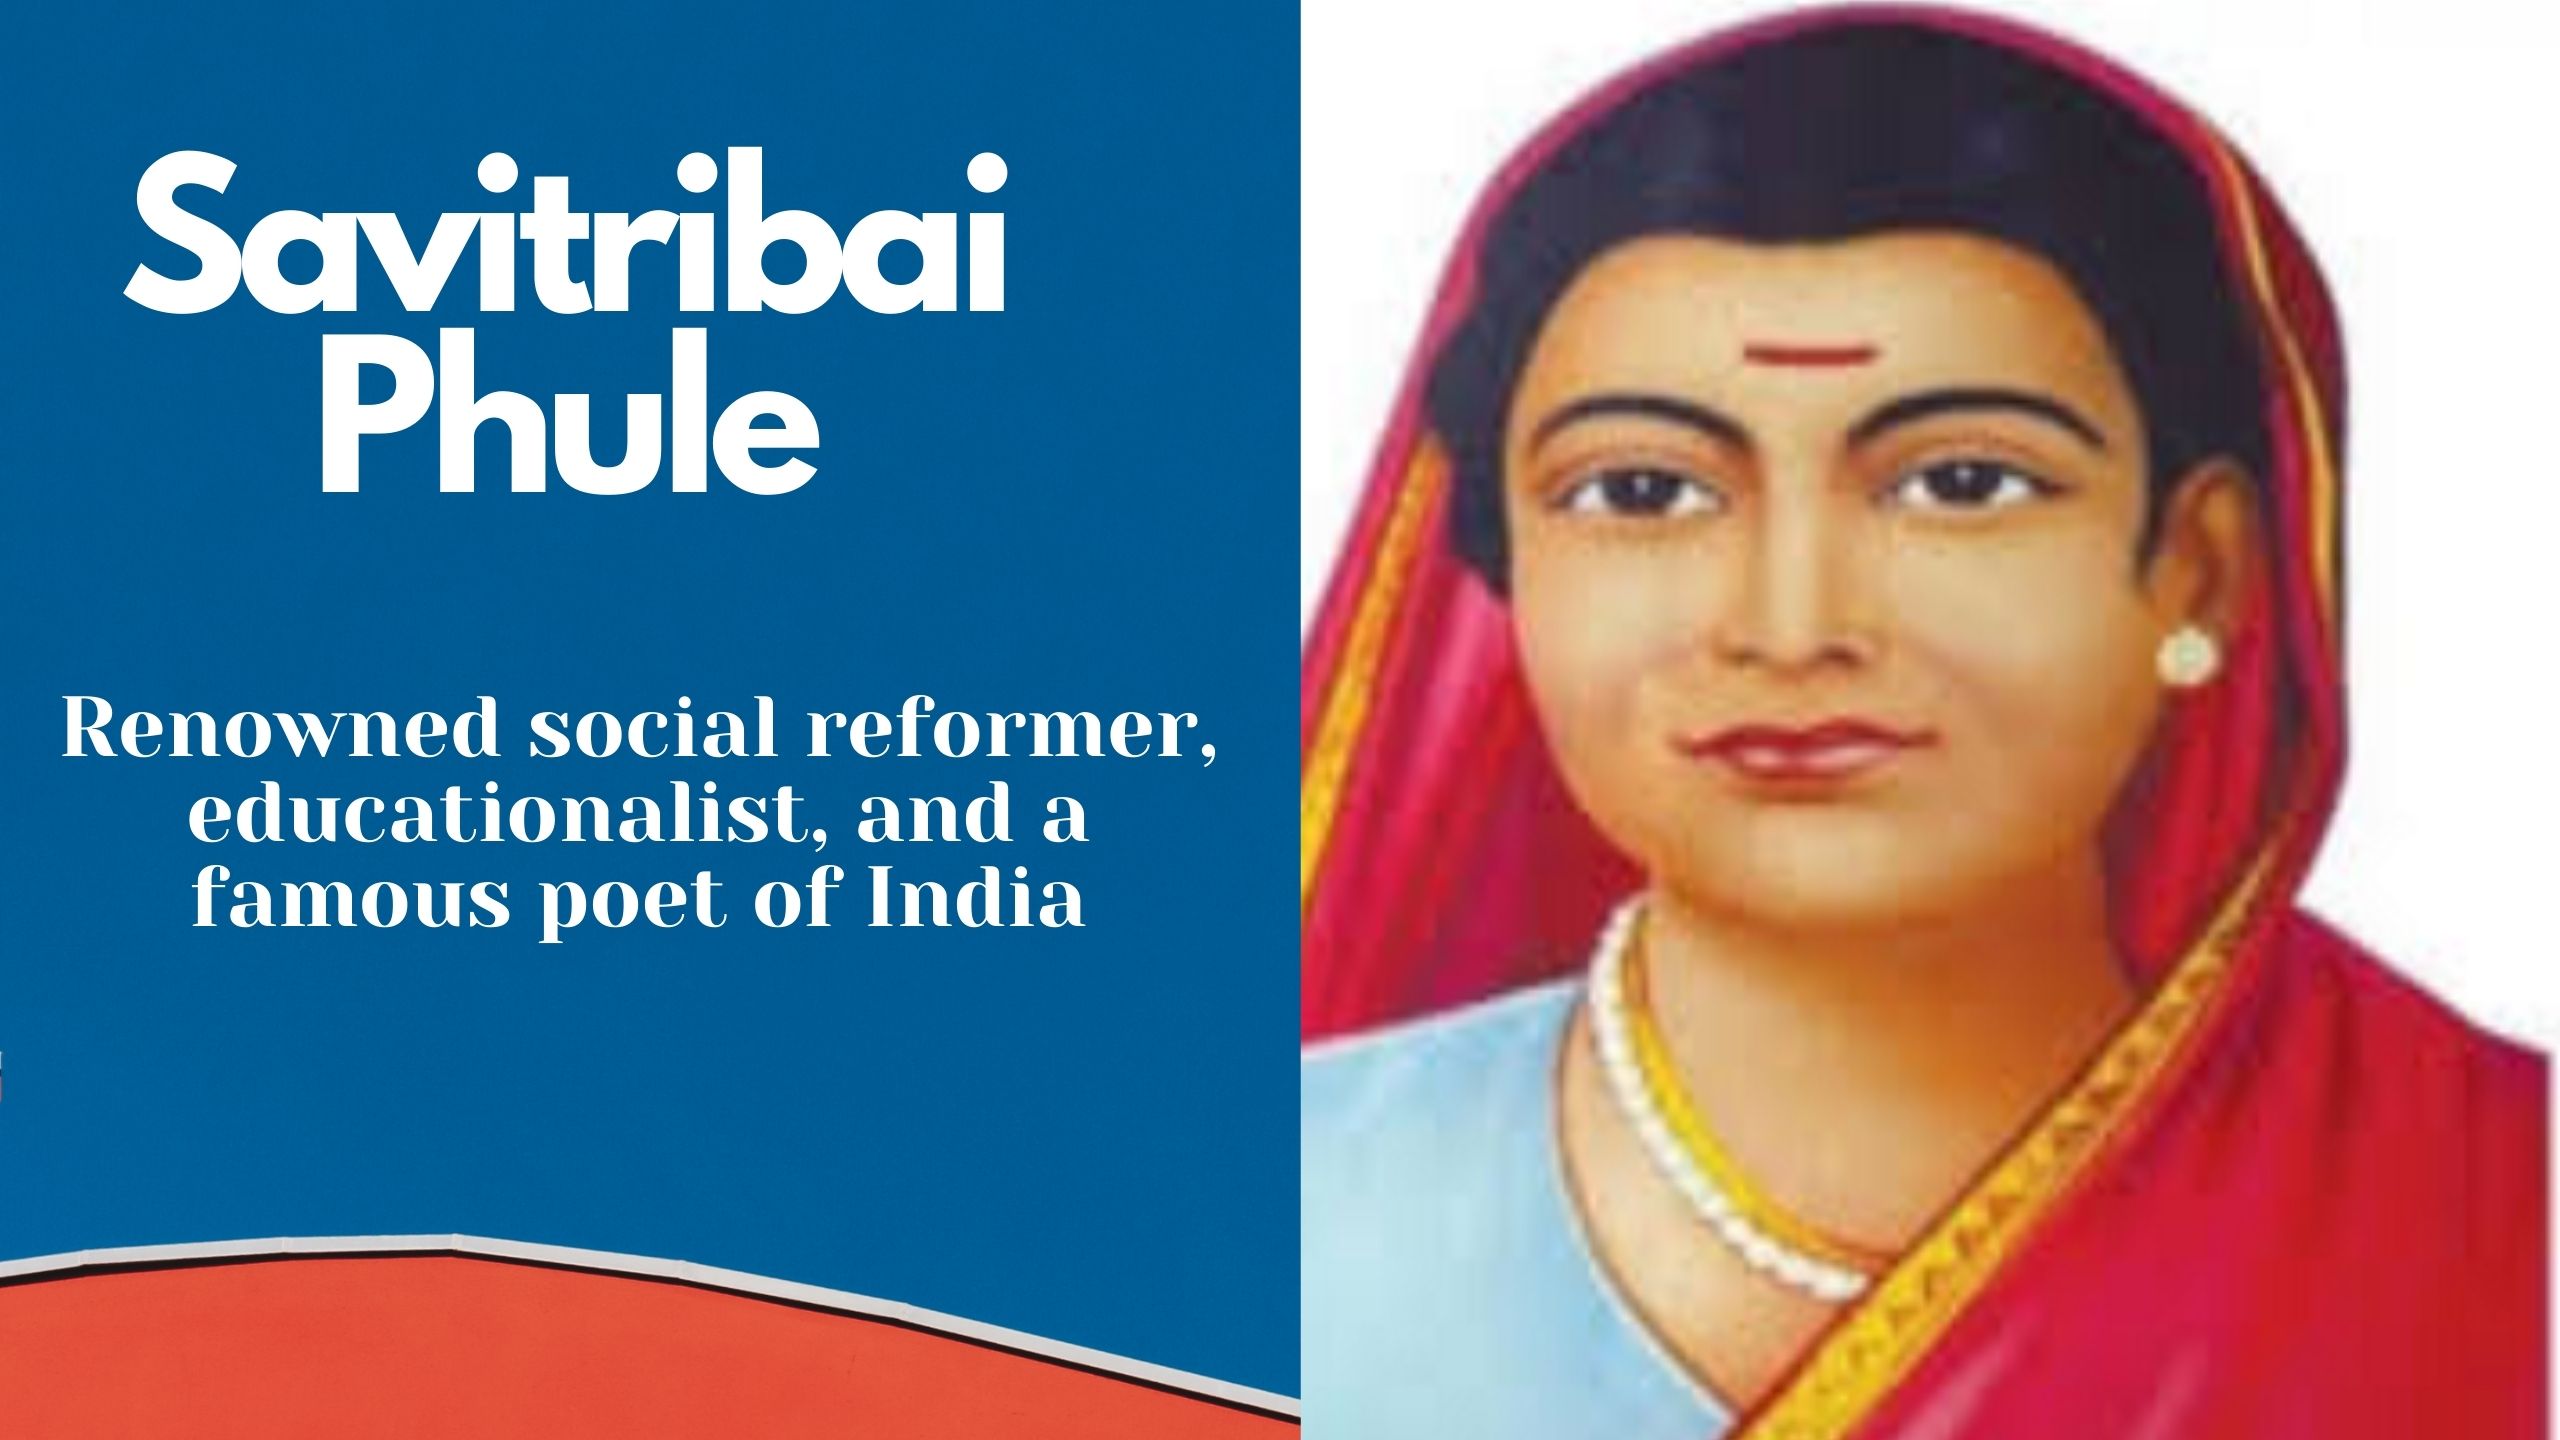 Savitribai Phule Biography – renowned social reformer, educationalist, and a famous poet of India